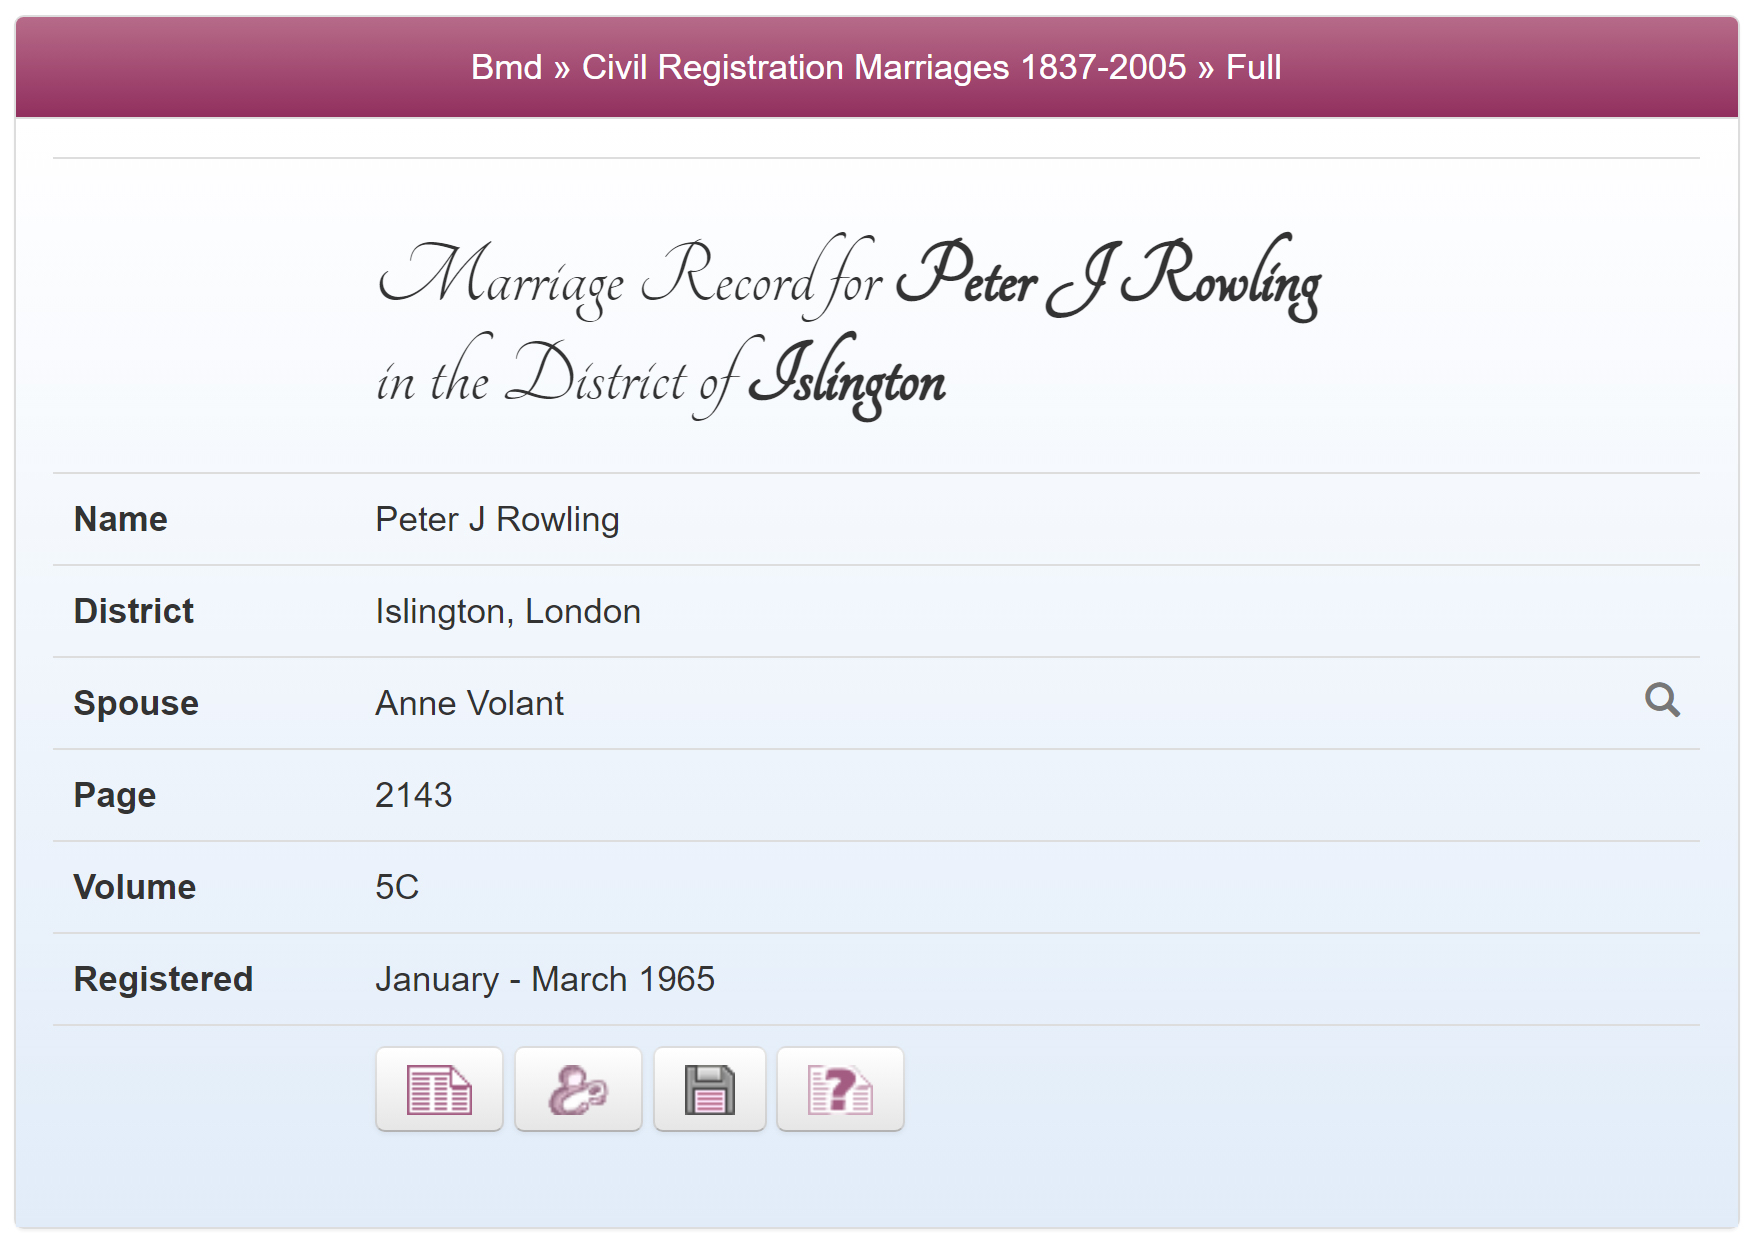 Peter & Anne's marriage record